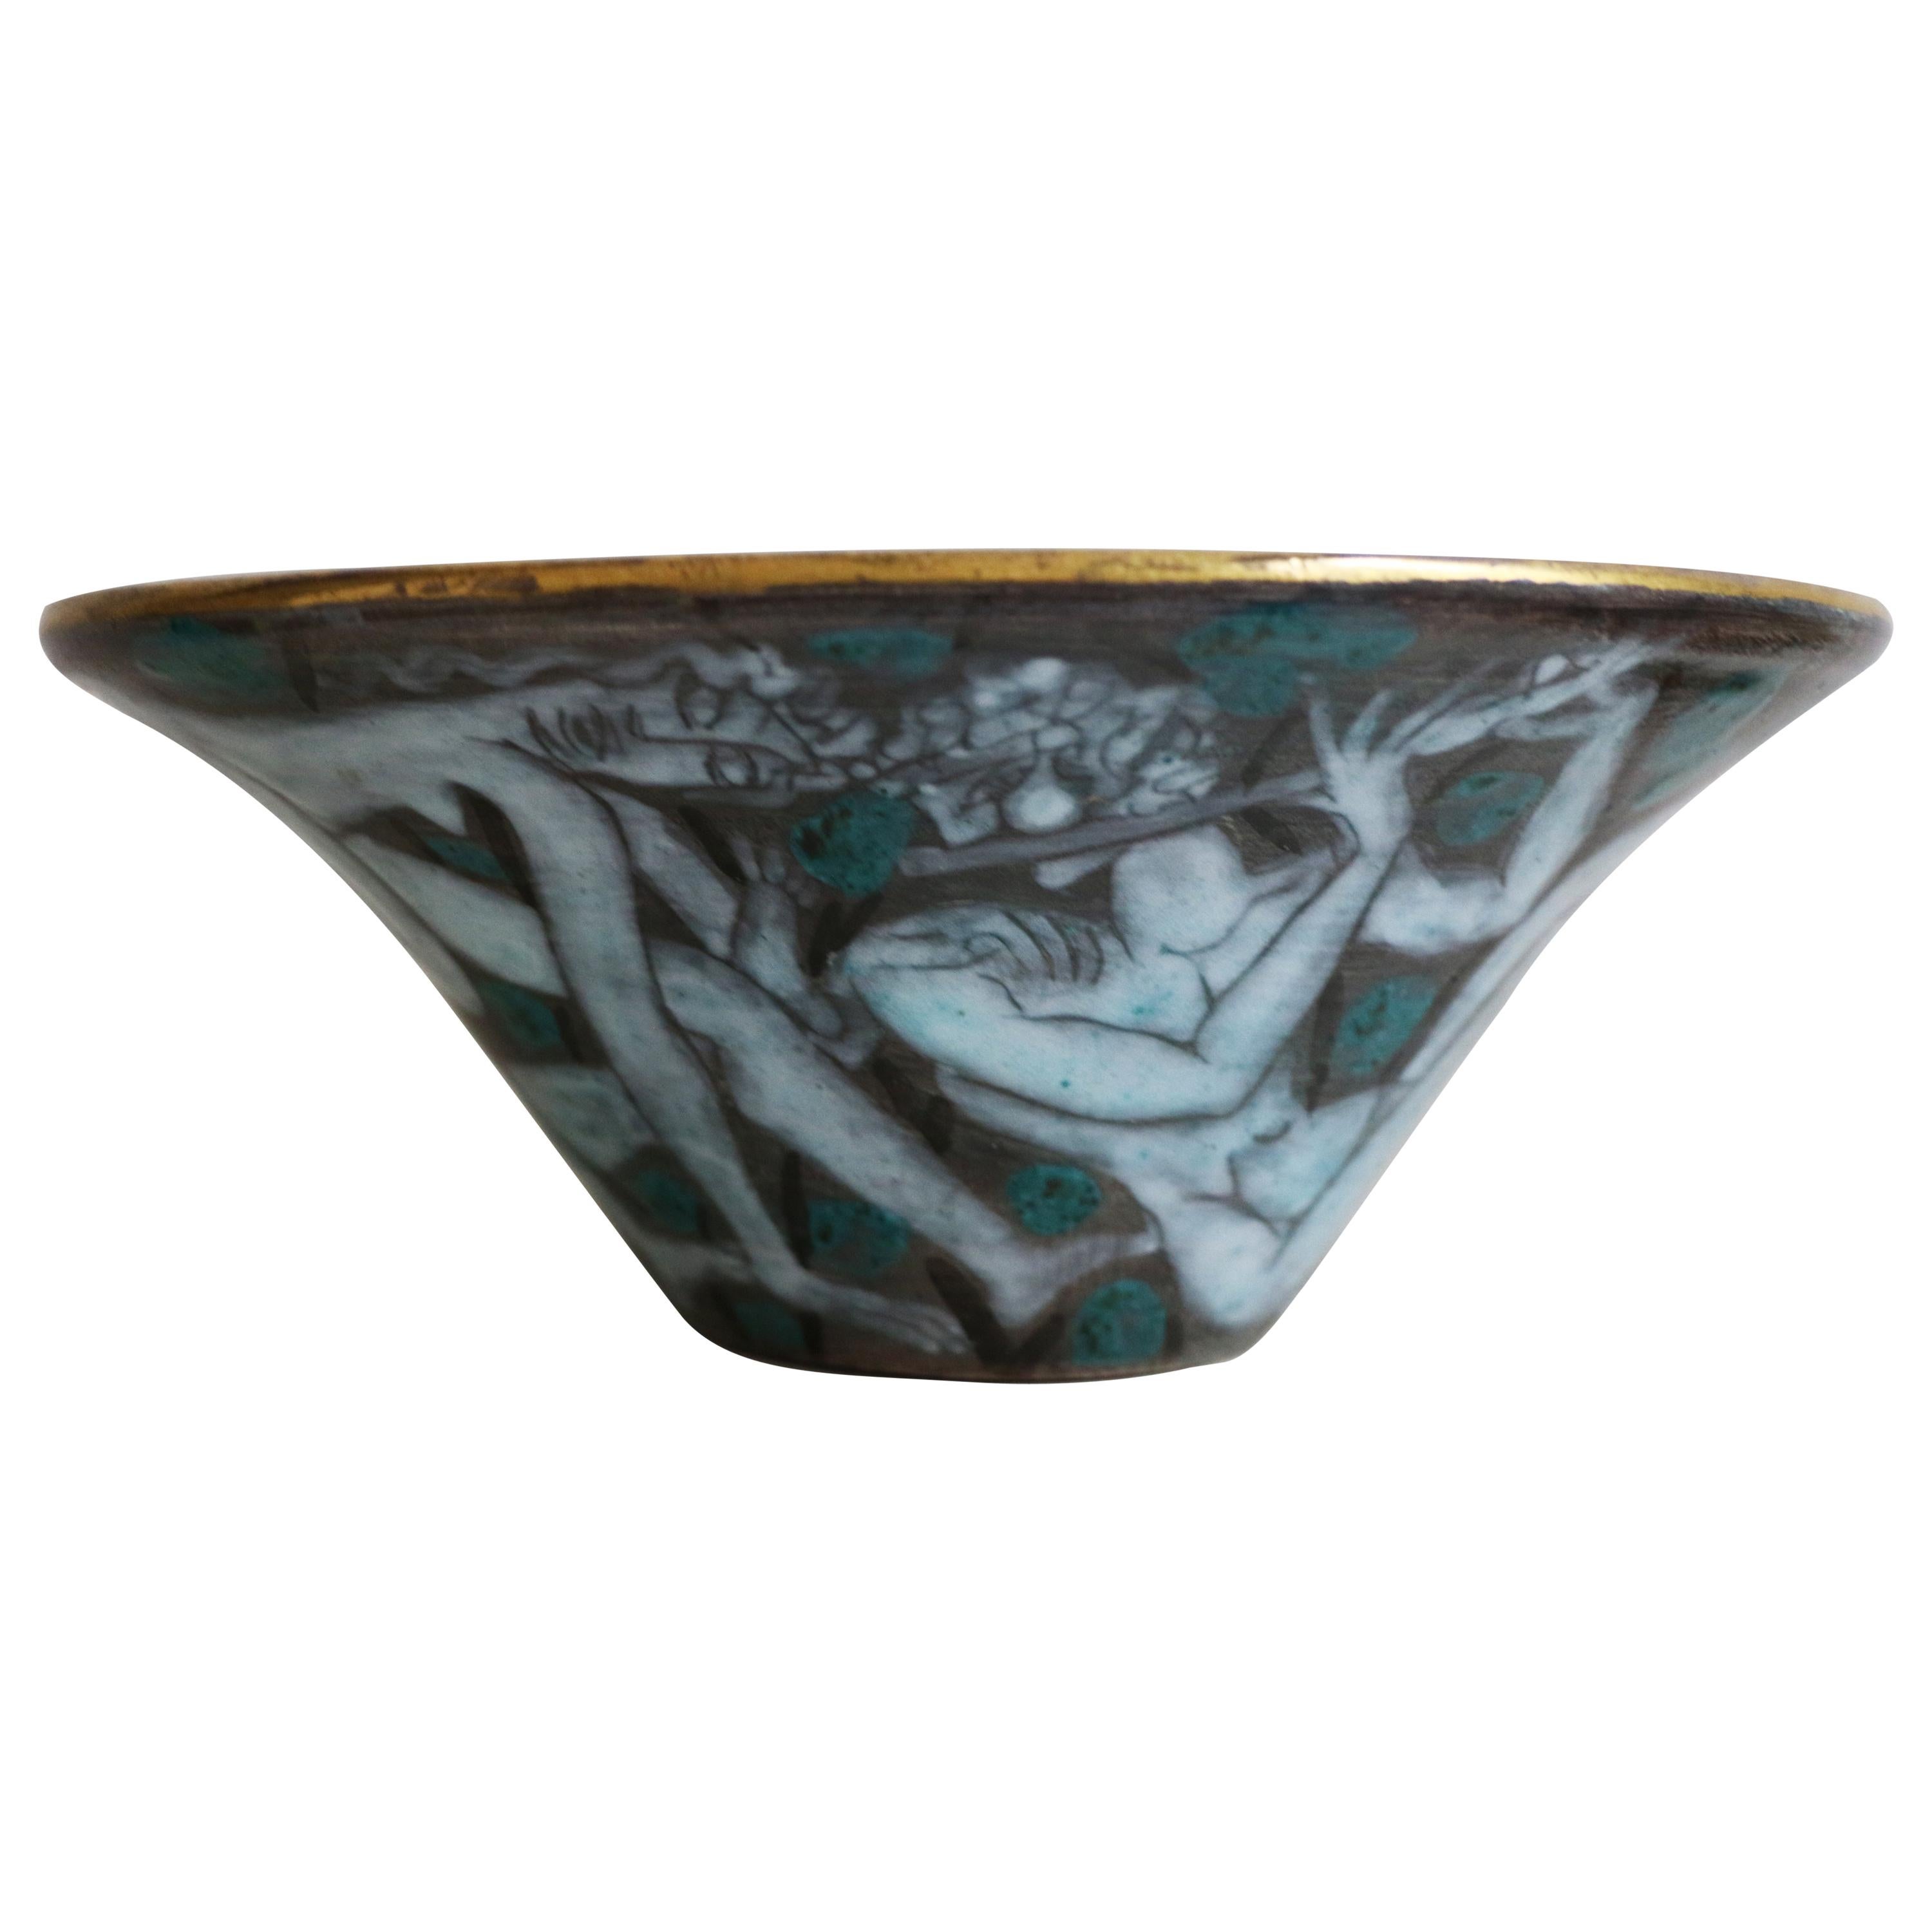 Large Enameled Cup in Earthenware by Edouard Cazaux, France, Art Deco, 1920-1930